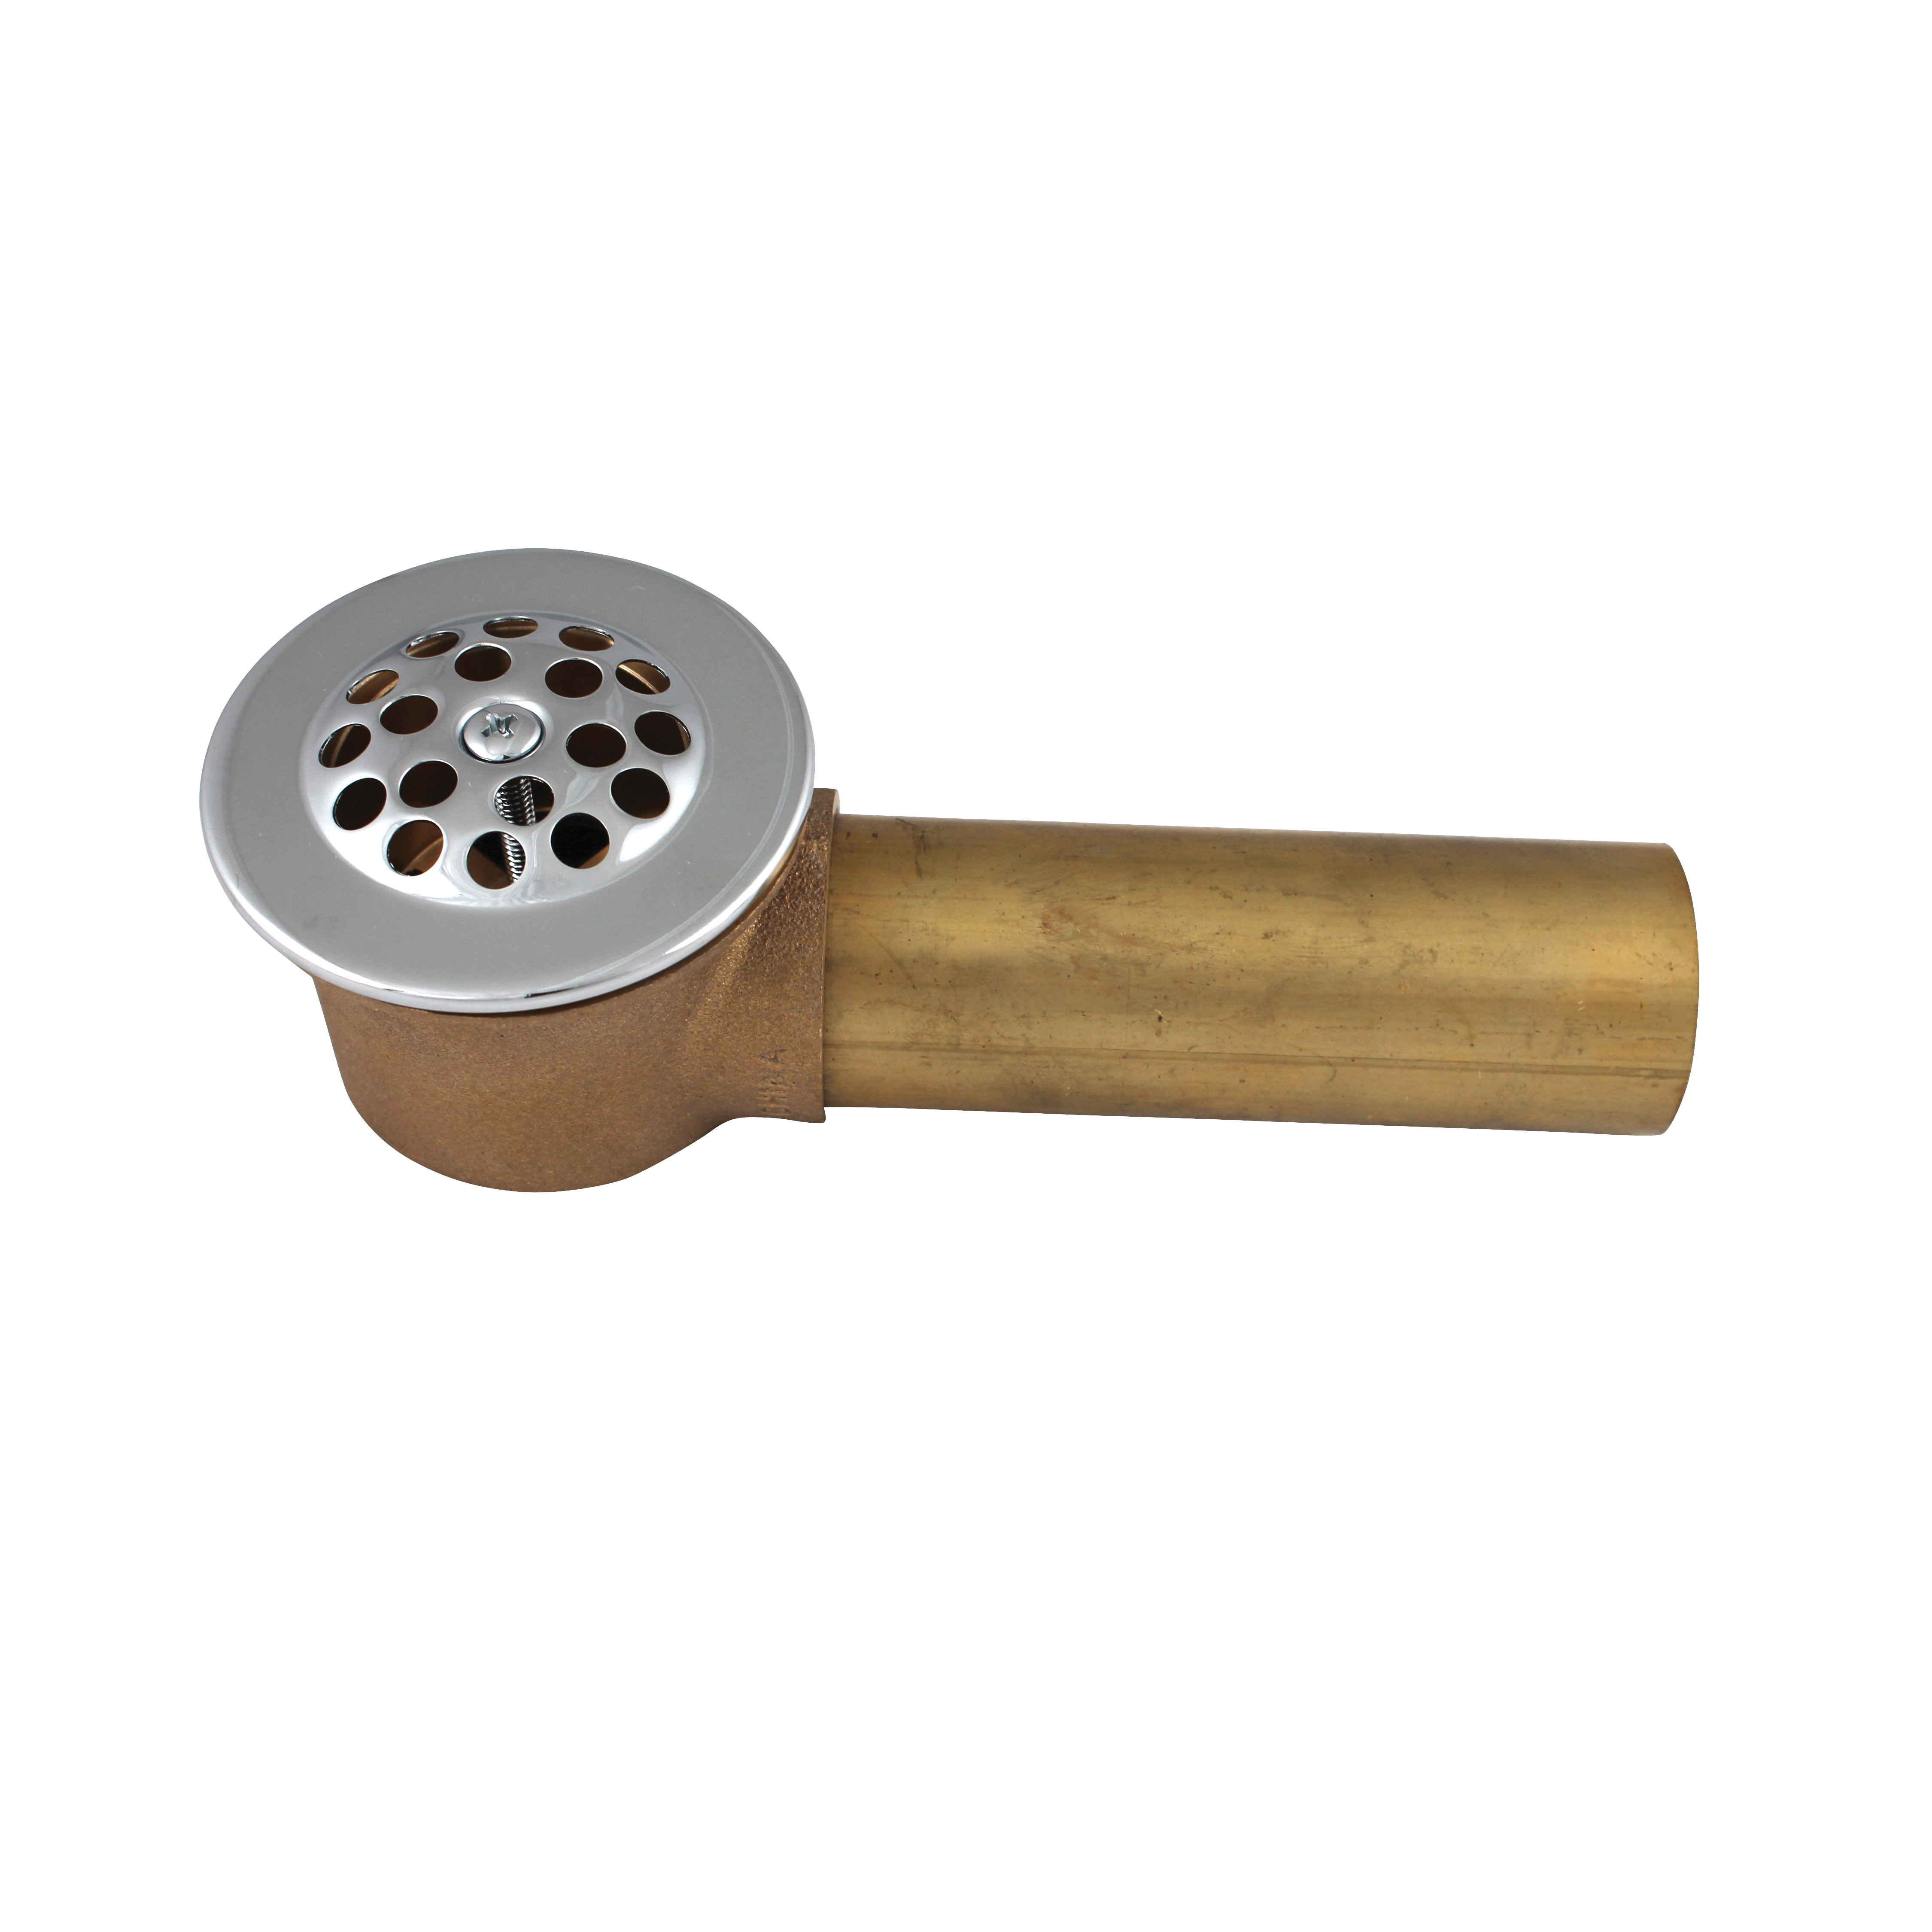 614RB Bath Drain Waste Shoe, Brass, For: #609 and #615 Triple Lever Garden Tub